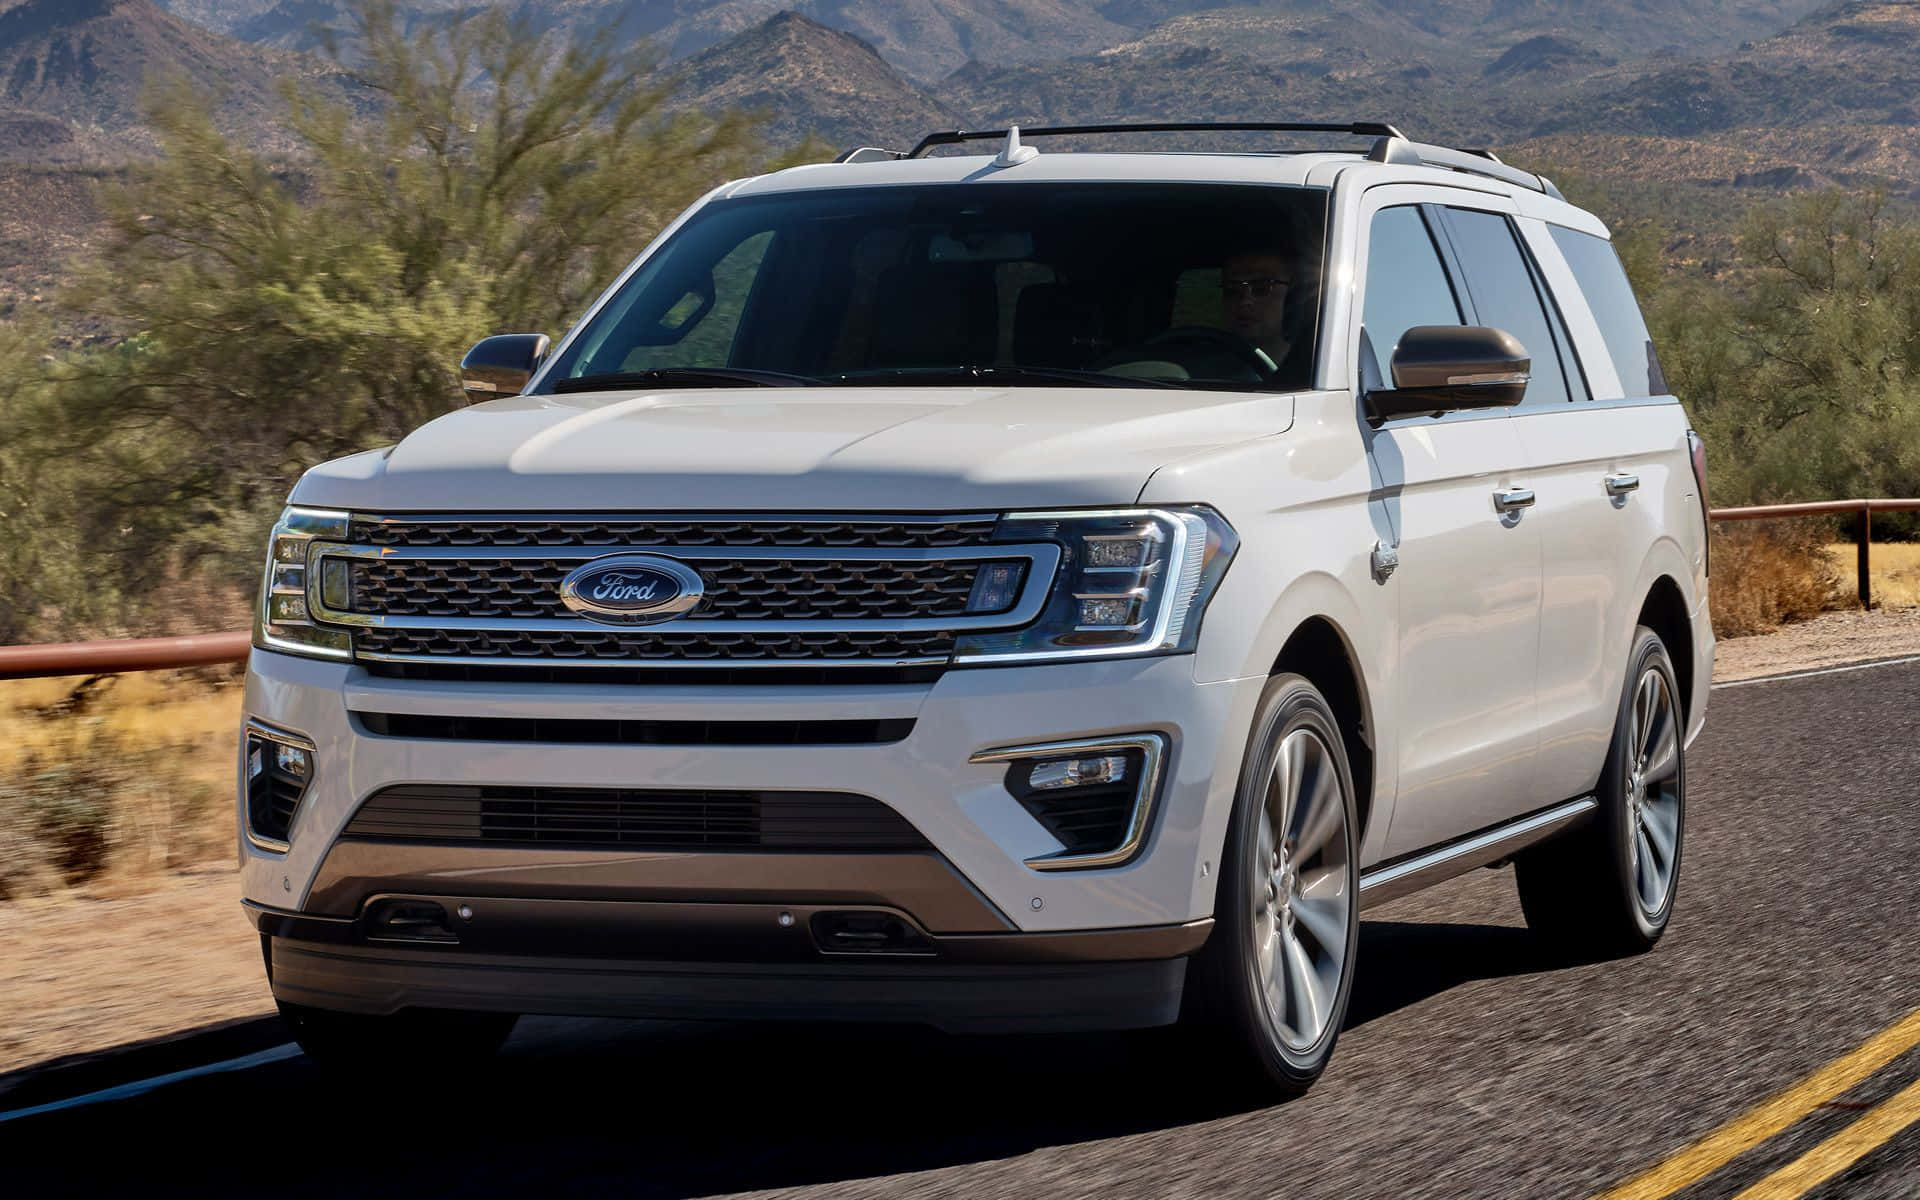 Stunning Ford Expedition in Nature Wallpaper